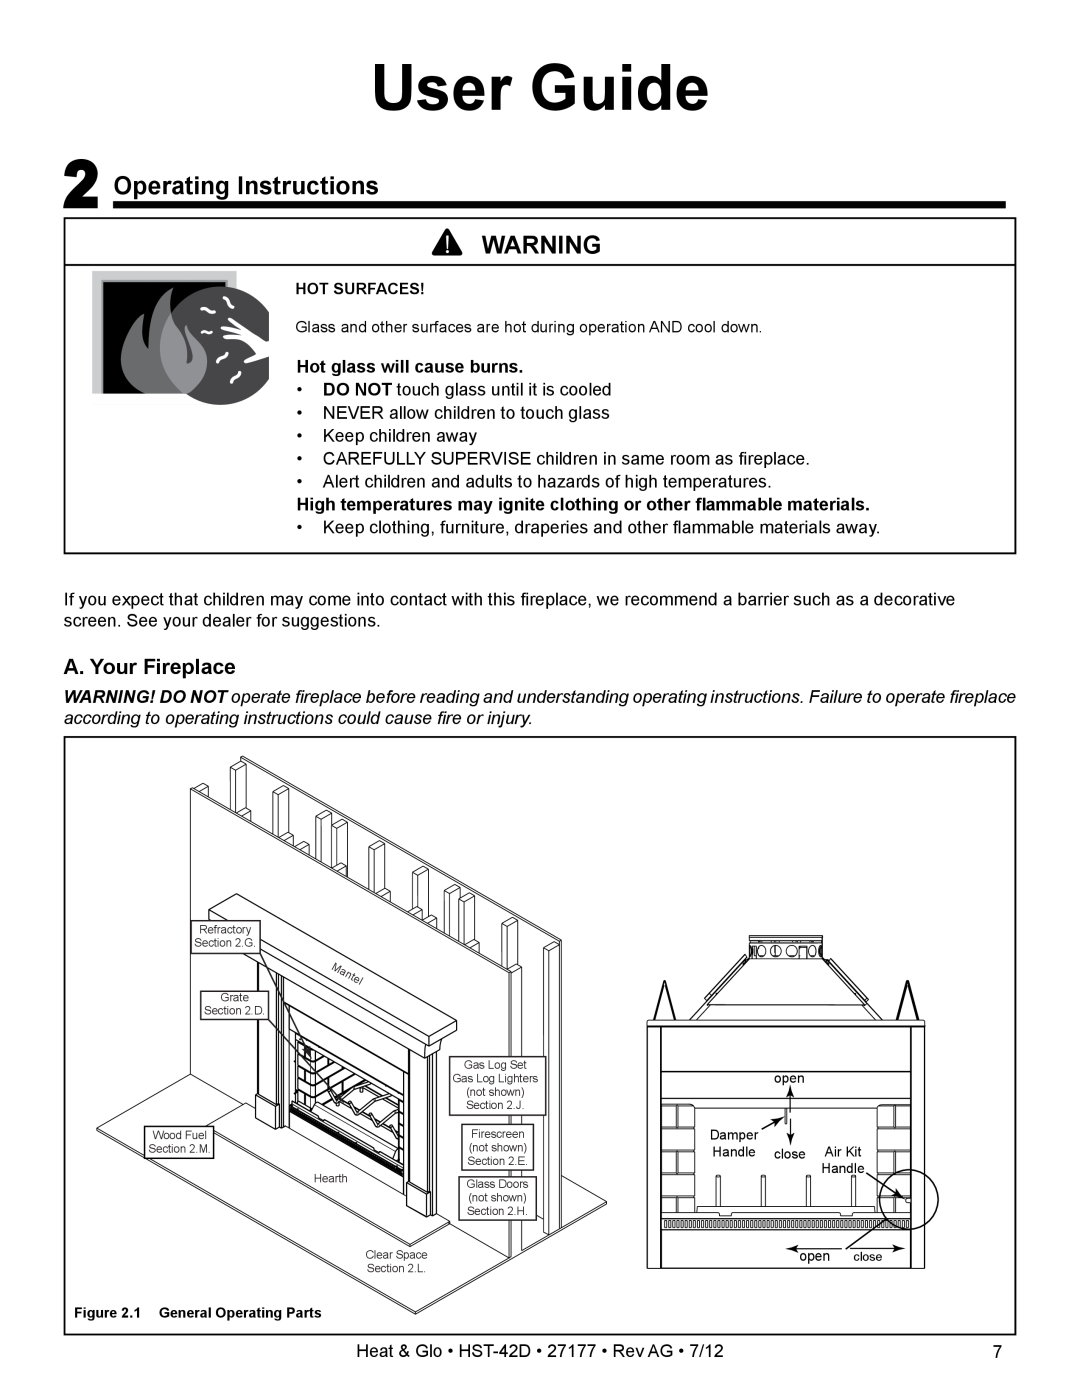 Heat & Glo LifeStyle HST-42D User Guide, 2Operating Instructions, A. Your Fireplace, Hot glass will cause burns 